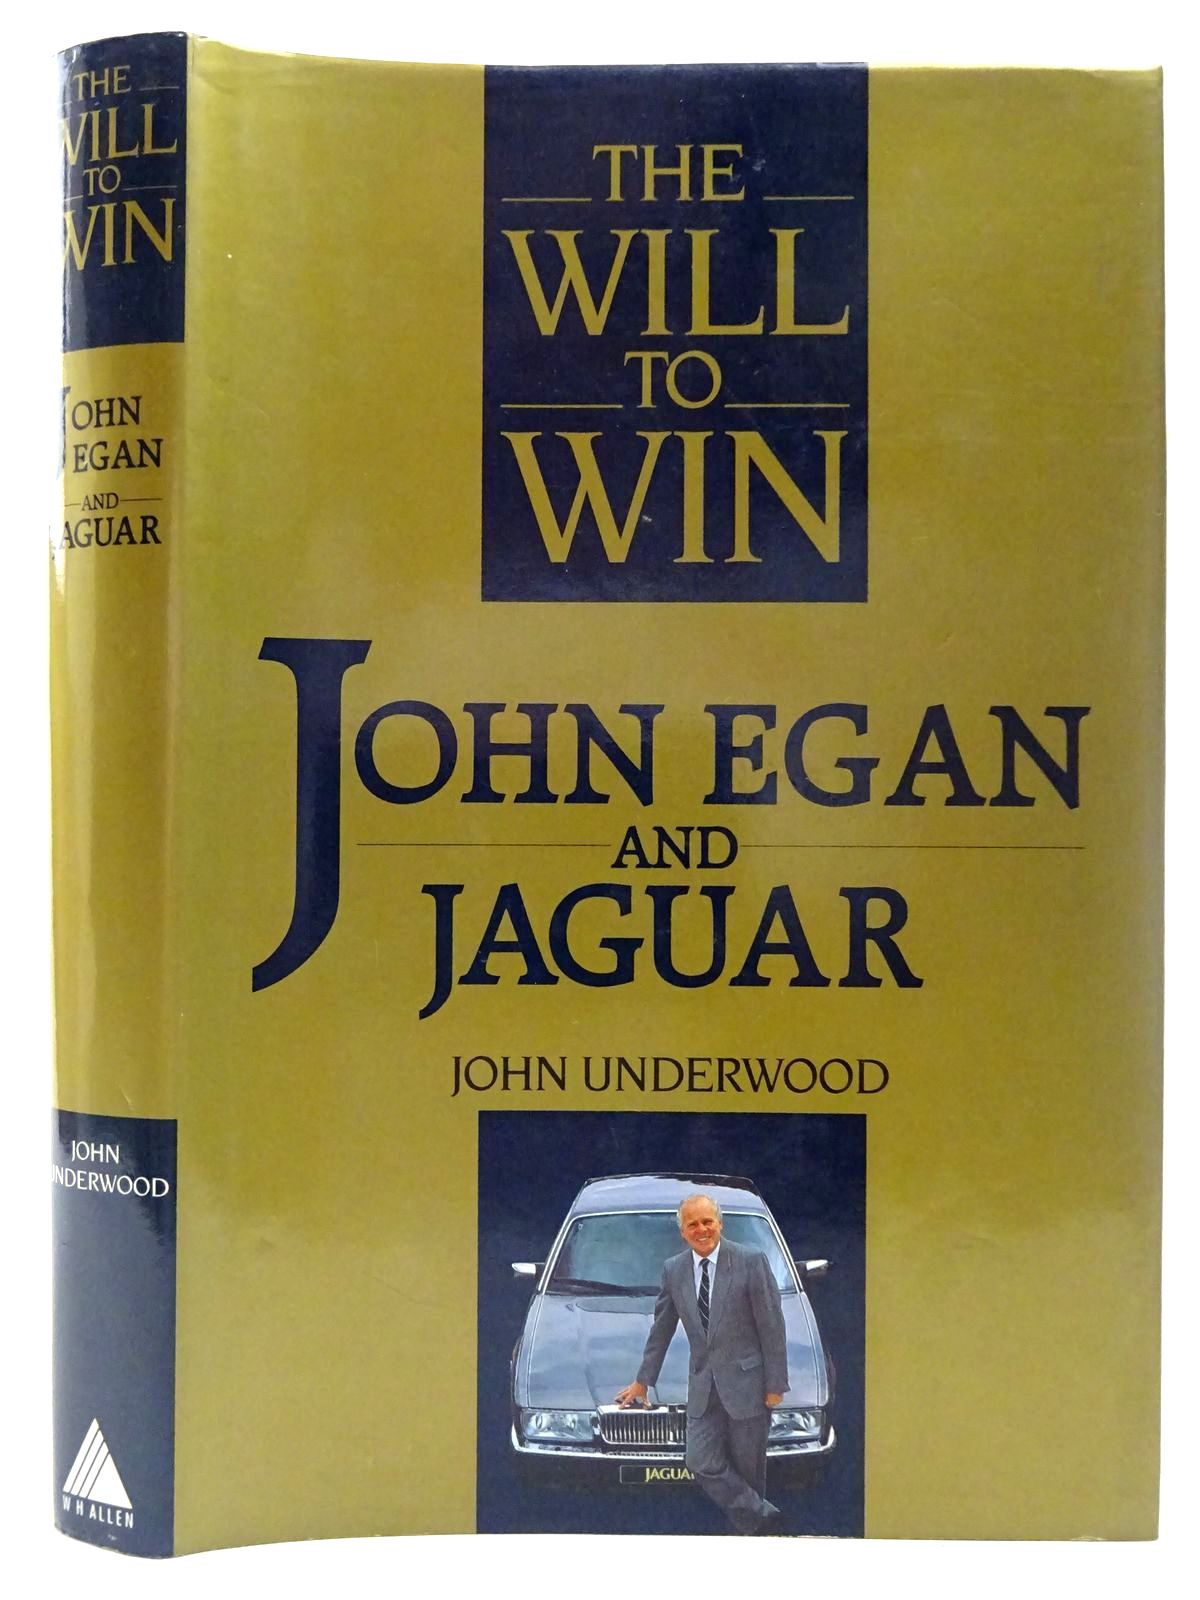 Photo of THE WILL TO WIN JOHN EGAN AND JAGUAR written by Underwood, John published by W.H. Allen (STOCK CODE: 2126838)  for sale by Stella & Rose's Books